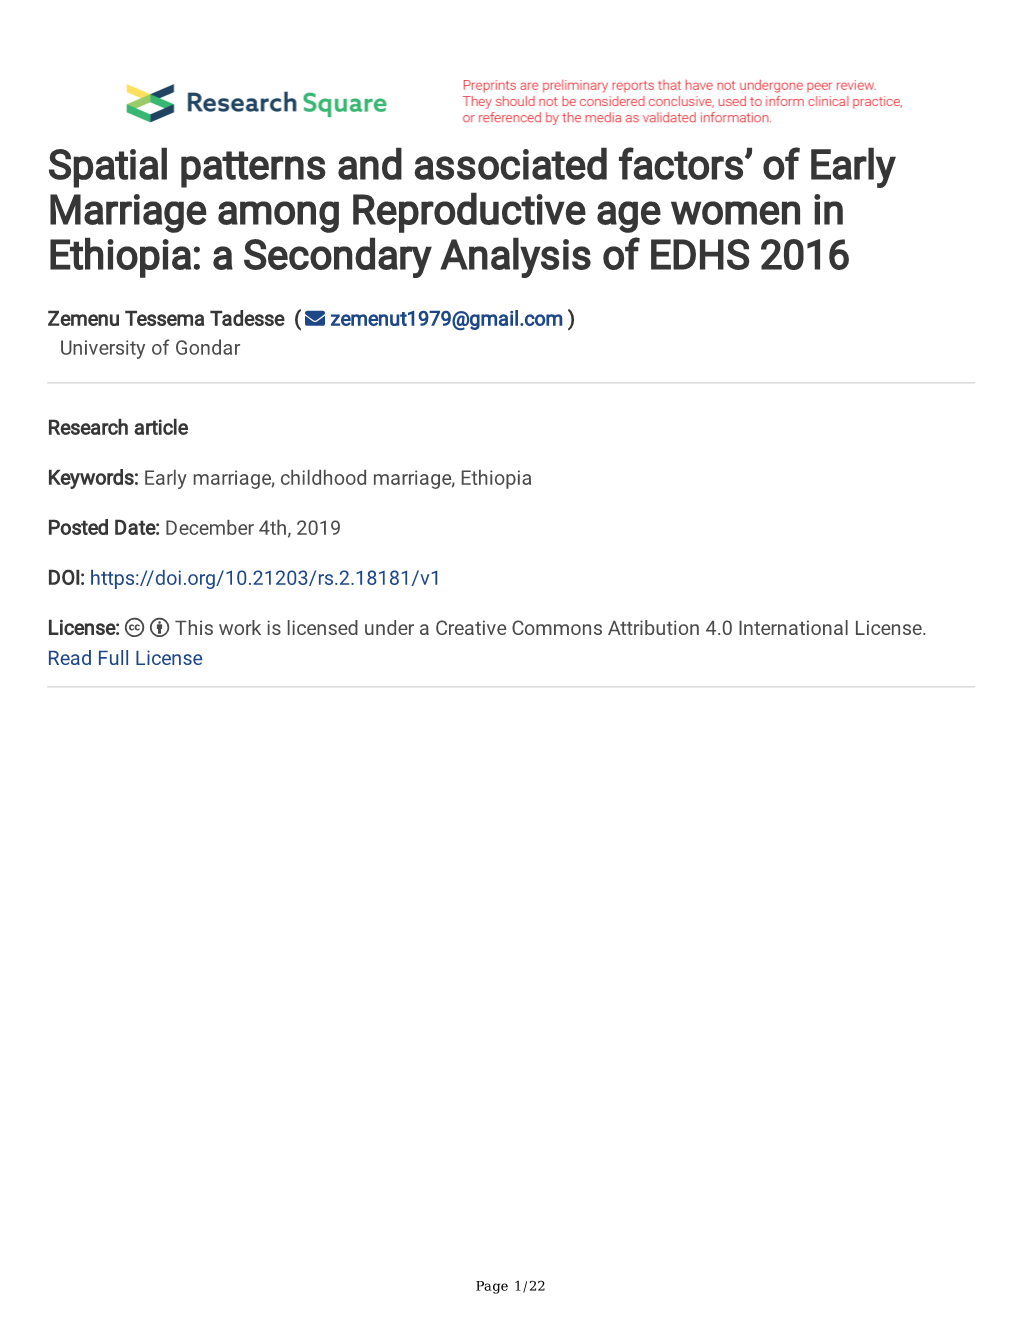 Spatial Patterns and Associated Factors' of Early Marriage Among